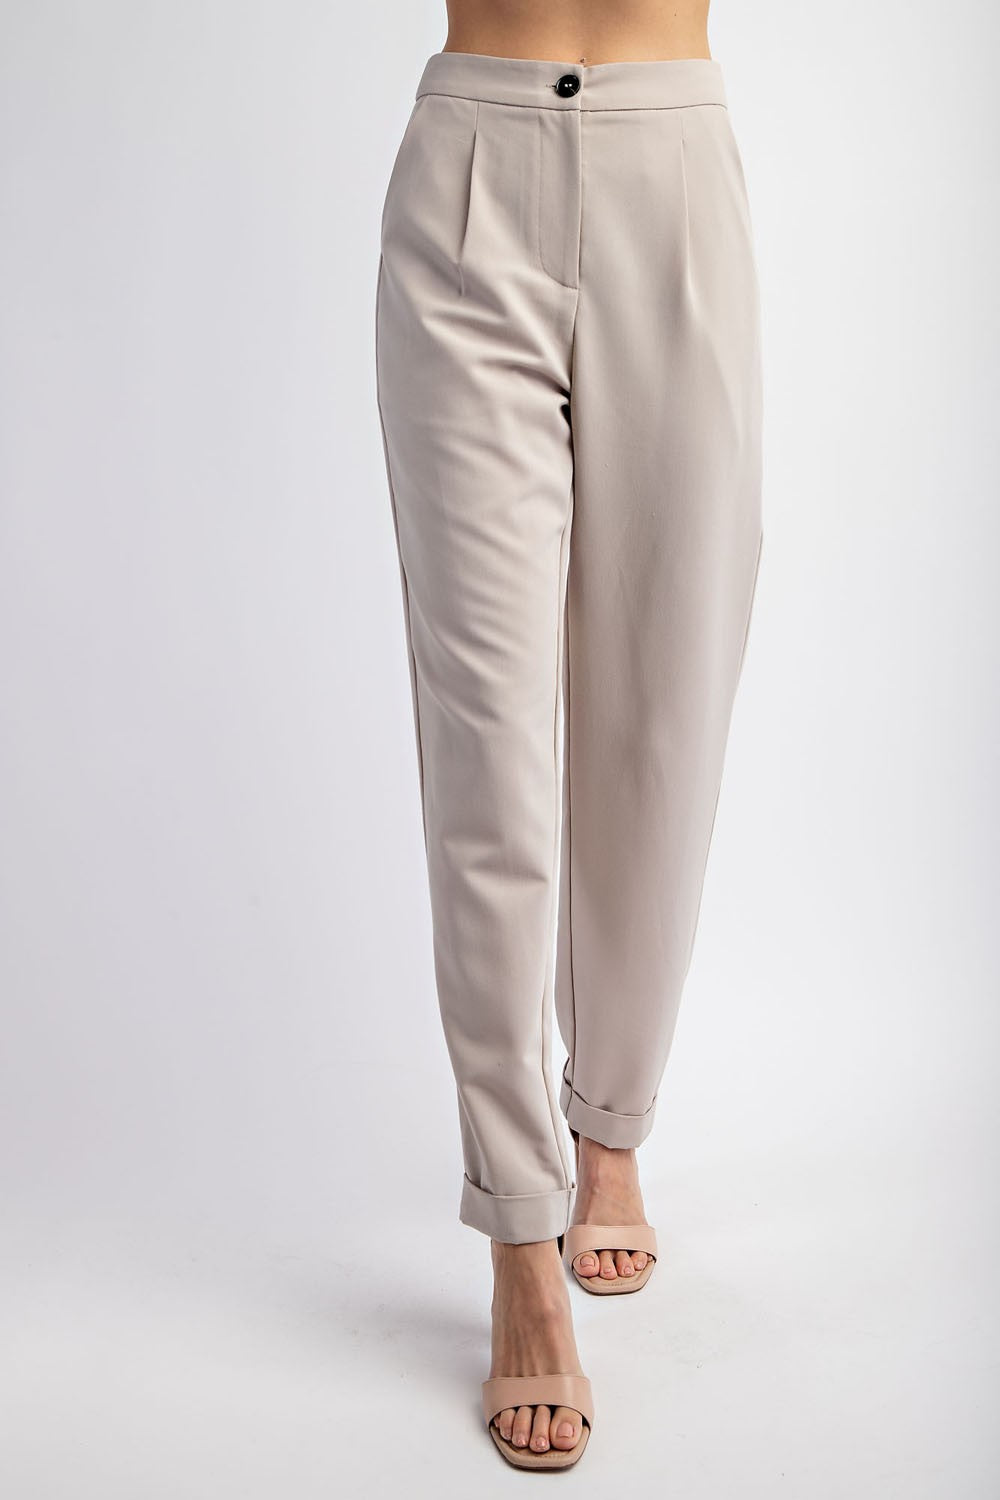 Polly Pleated Trouser- Sand